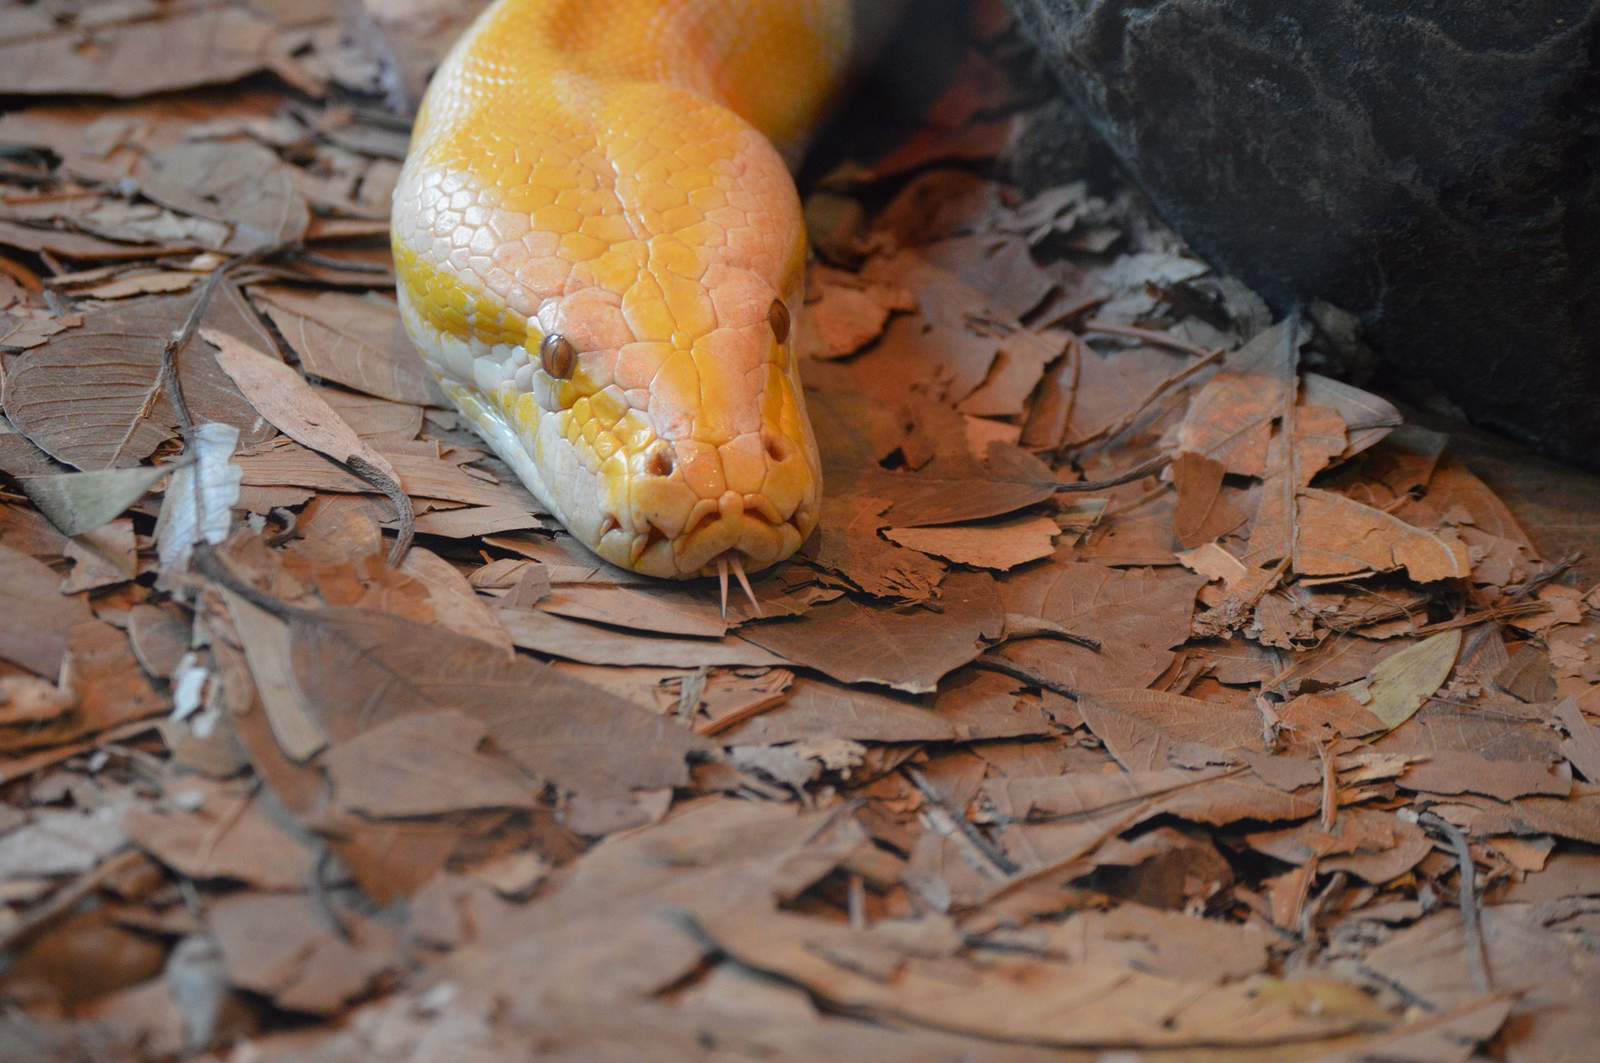 Police: Couple steals $300 albino python from pet store